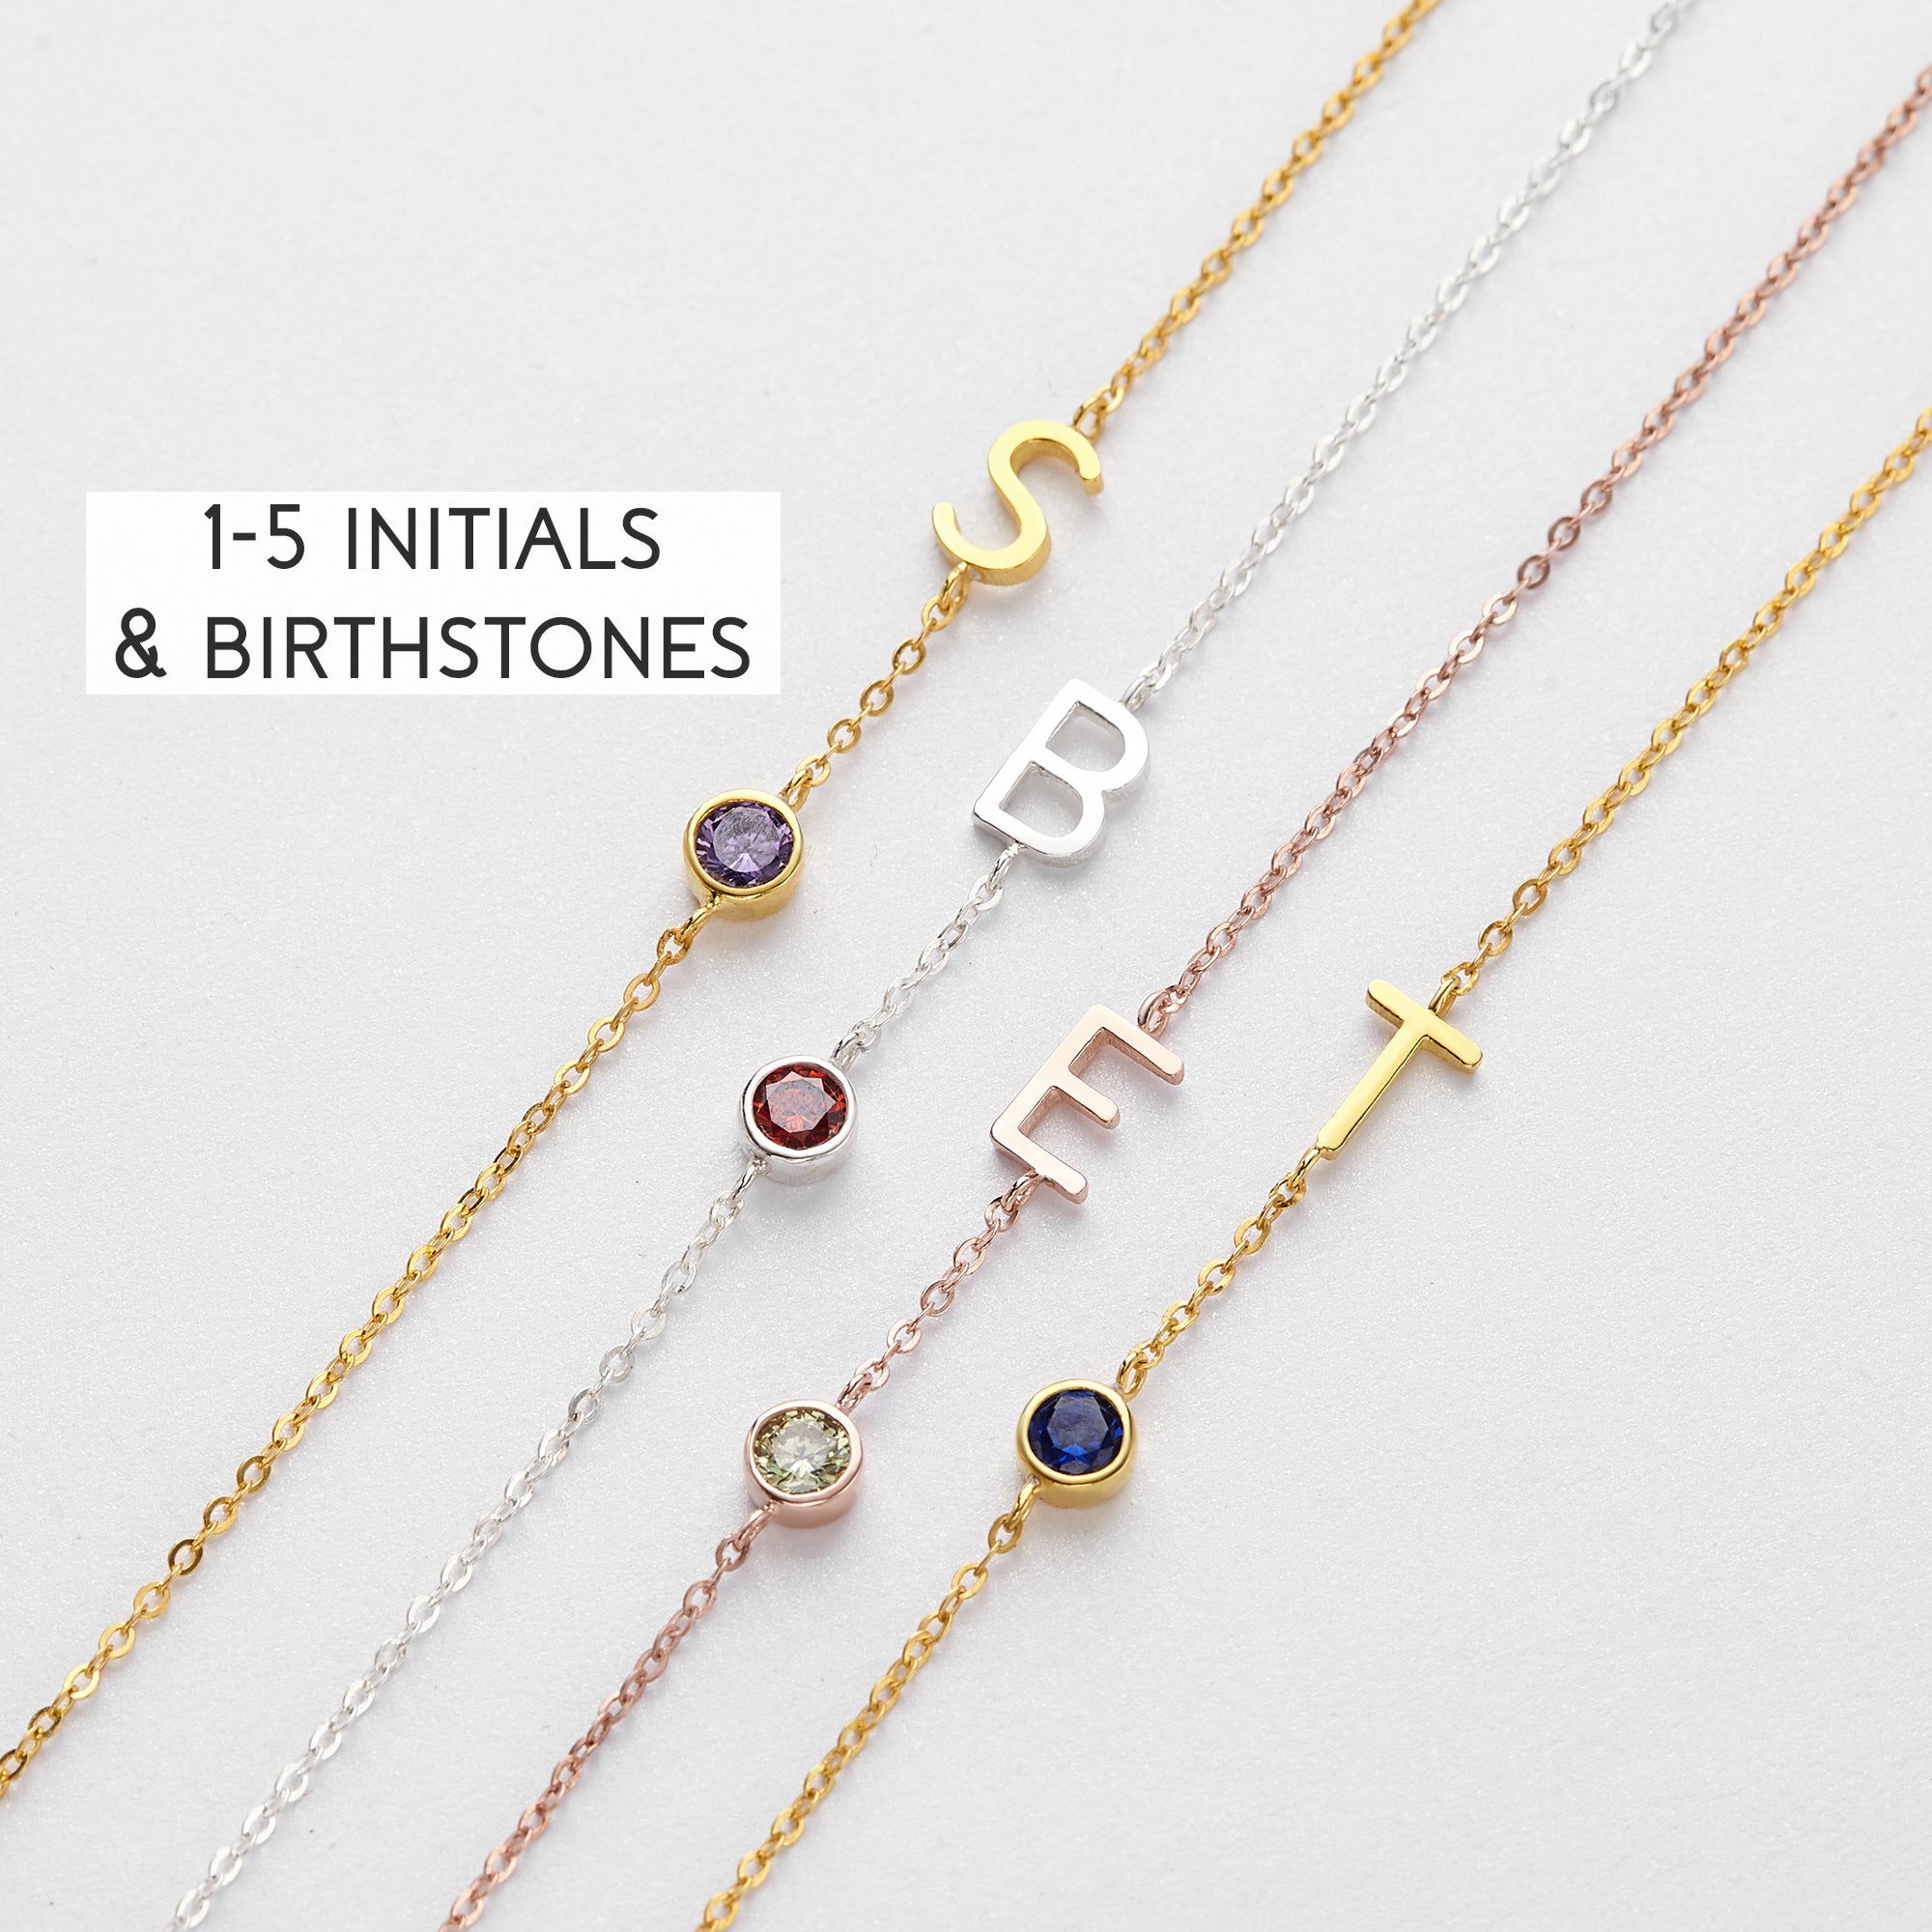 Personalized Birthstone Initial Necklace - 925 Sterling Silver & 18K Gold Plated, Perfect Christmas Gift for Mom or Grandma - Necklaces - Bijou Her -  -  - 